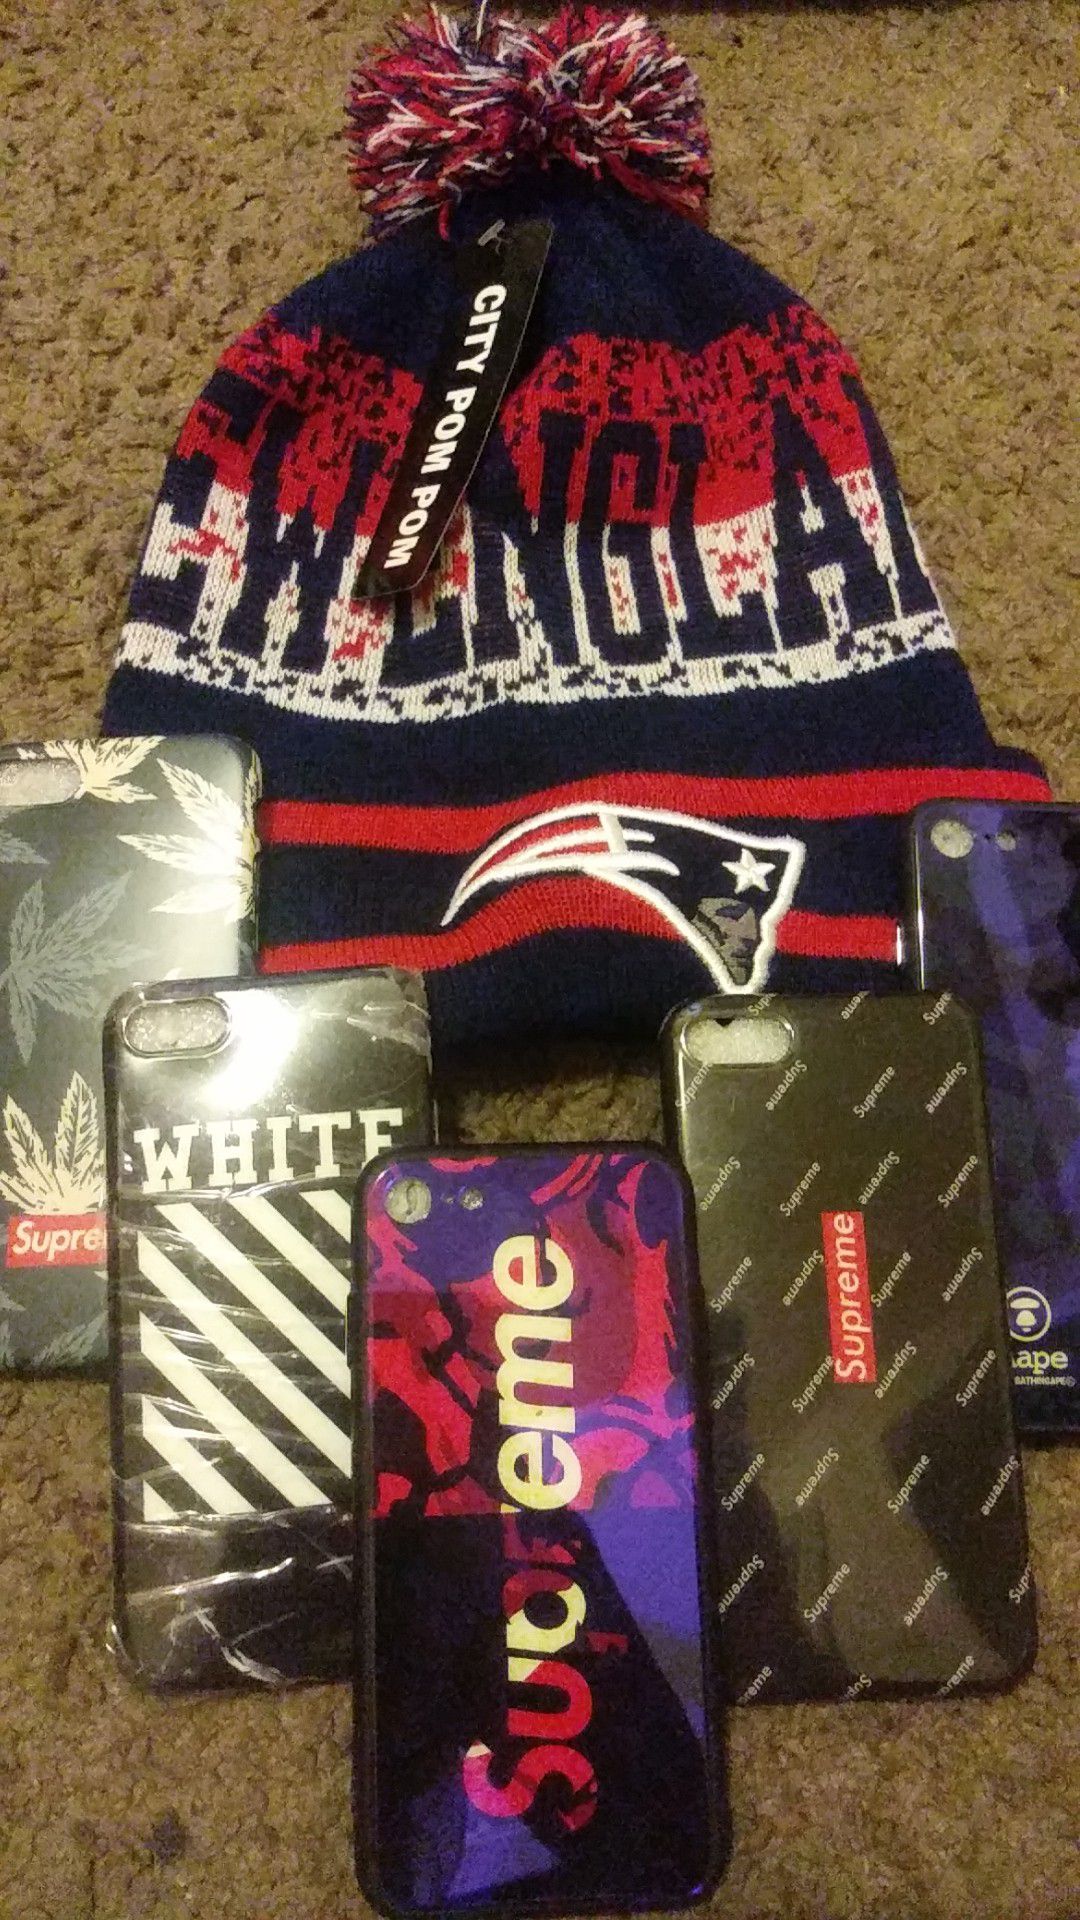 New Iphone 7 cases and new patriots beanie